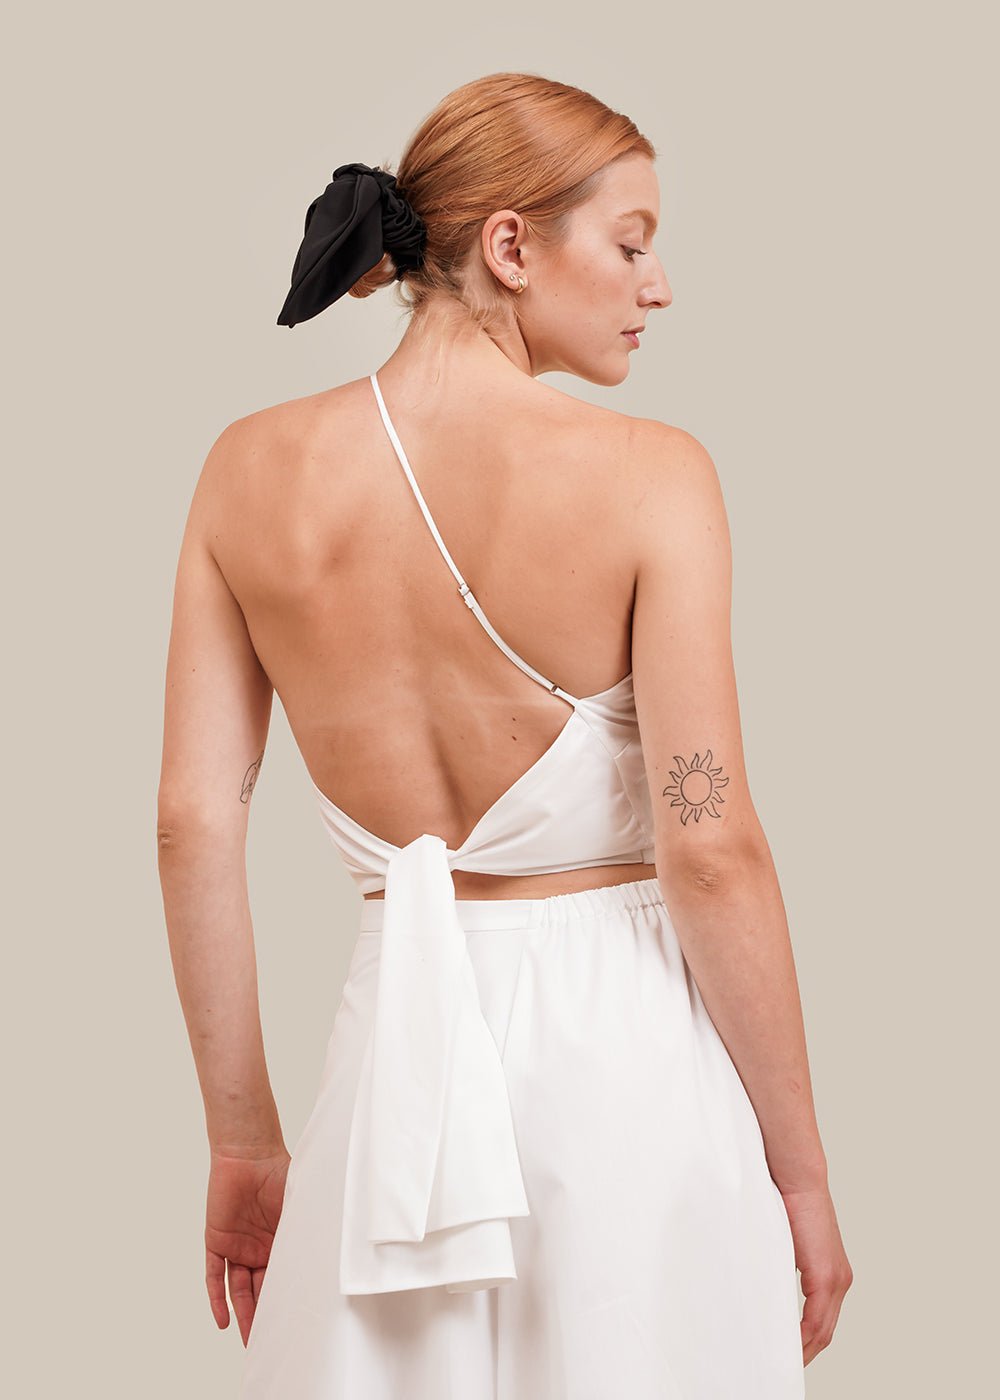 Angie Bauer White Corsica Top - New Classics Studios Sustainable Ethical Fashion Canada